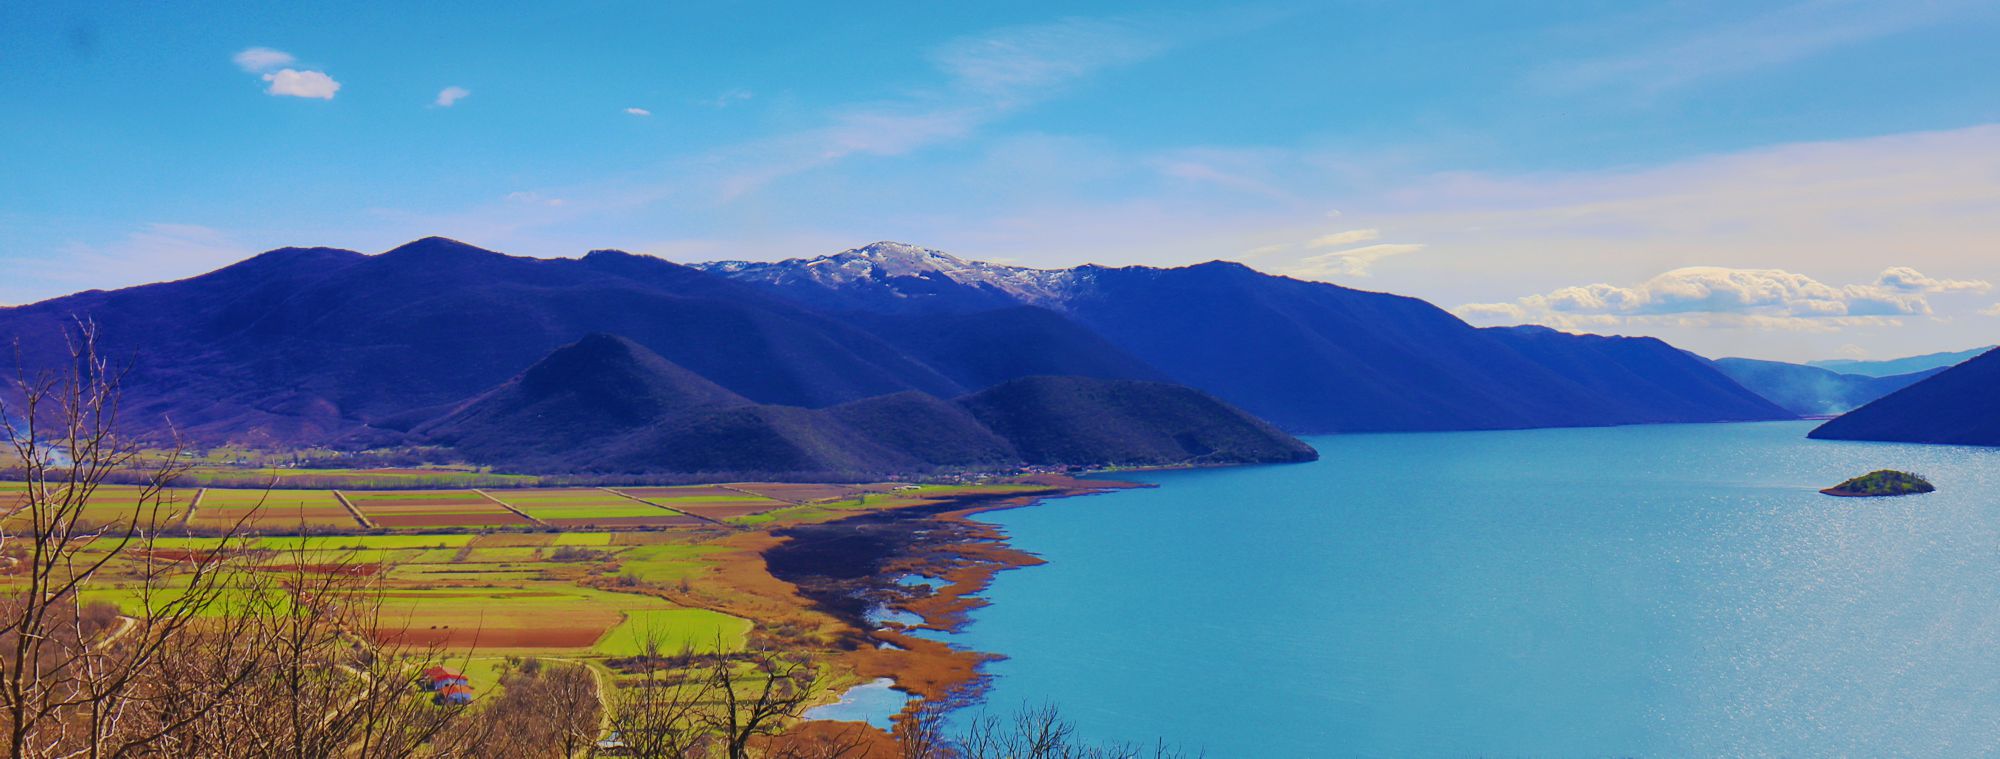 Hiking & mountaineering in Prespa Lakes: The SW part of Mikri Prespa lake, seen from Kale hilltop